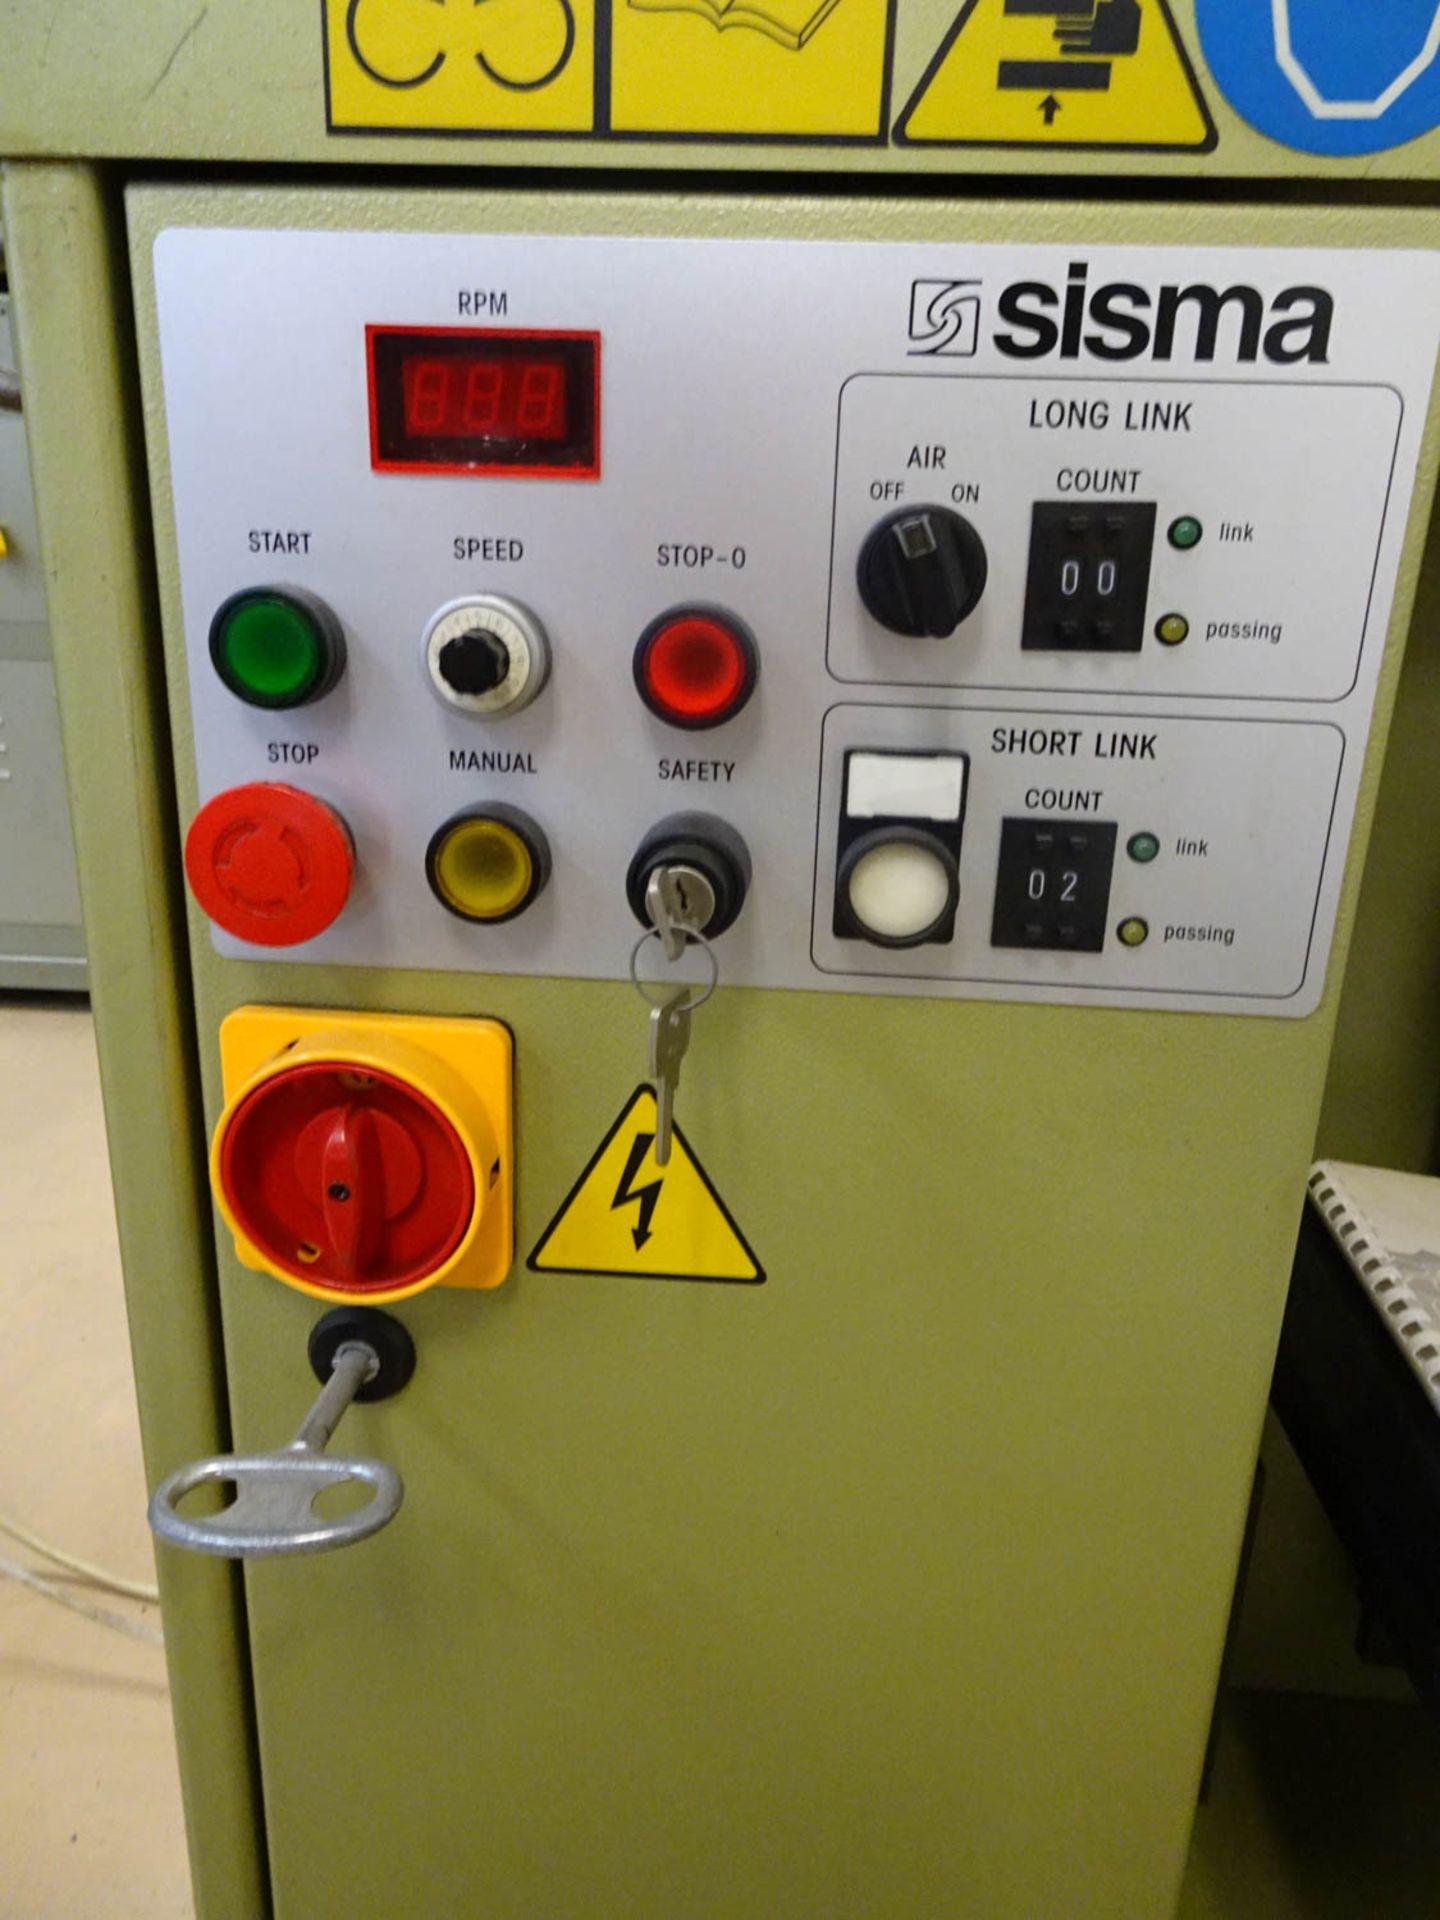 SISMA MDL. F2 (ITALY) (CE) CHAIN MAKING MACHINE, HIGH SPEED FIGARO LONG & SHORT, CURB & CABLE, 0. - Image 7 of 8